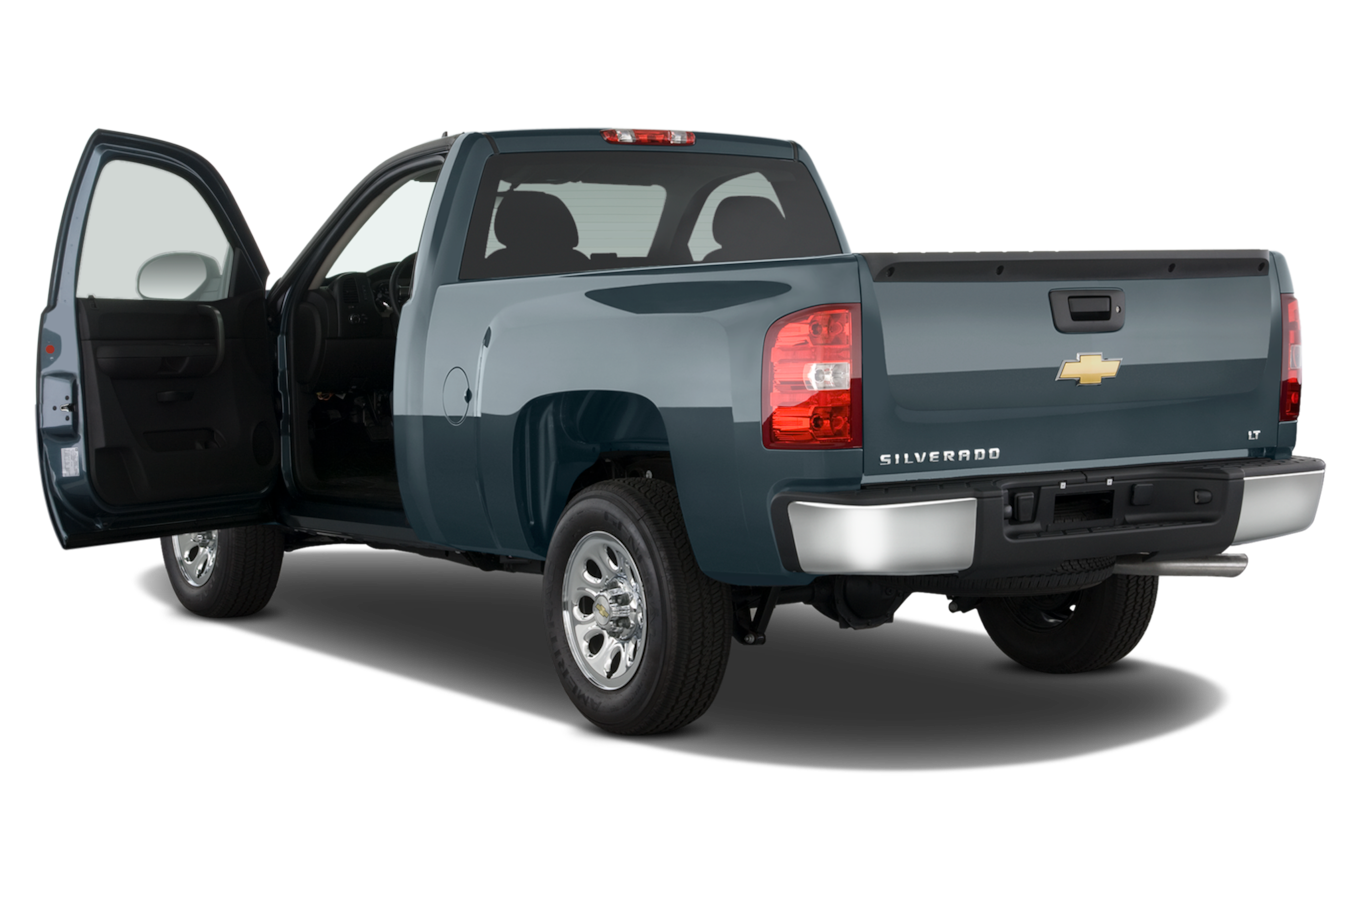 Pickup Truck PNG High Quality Image